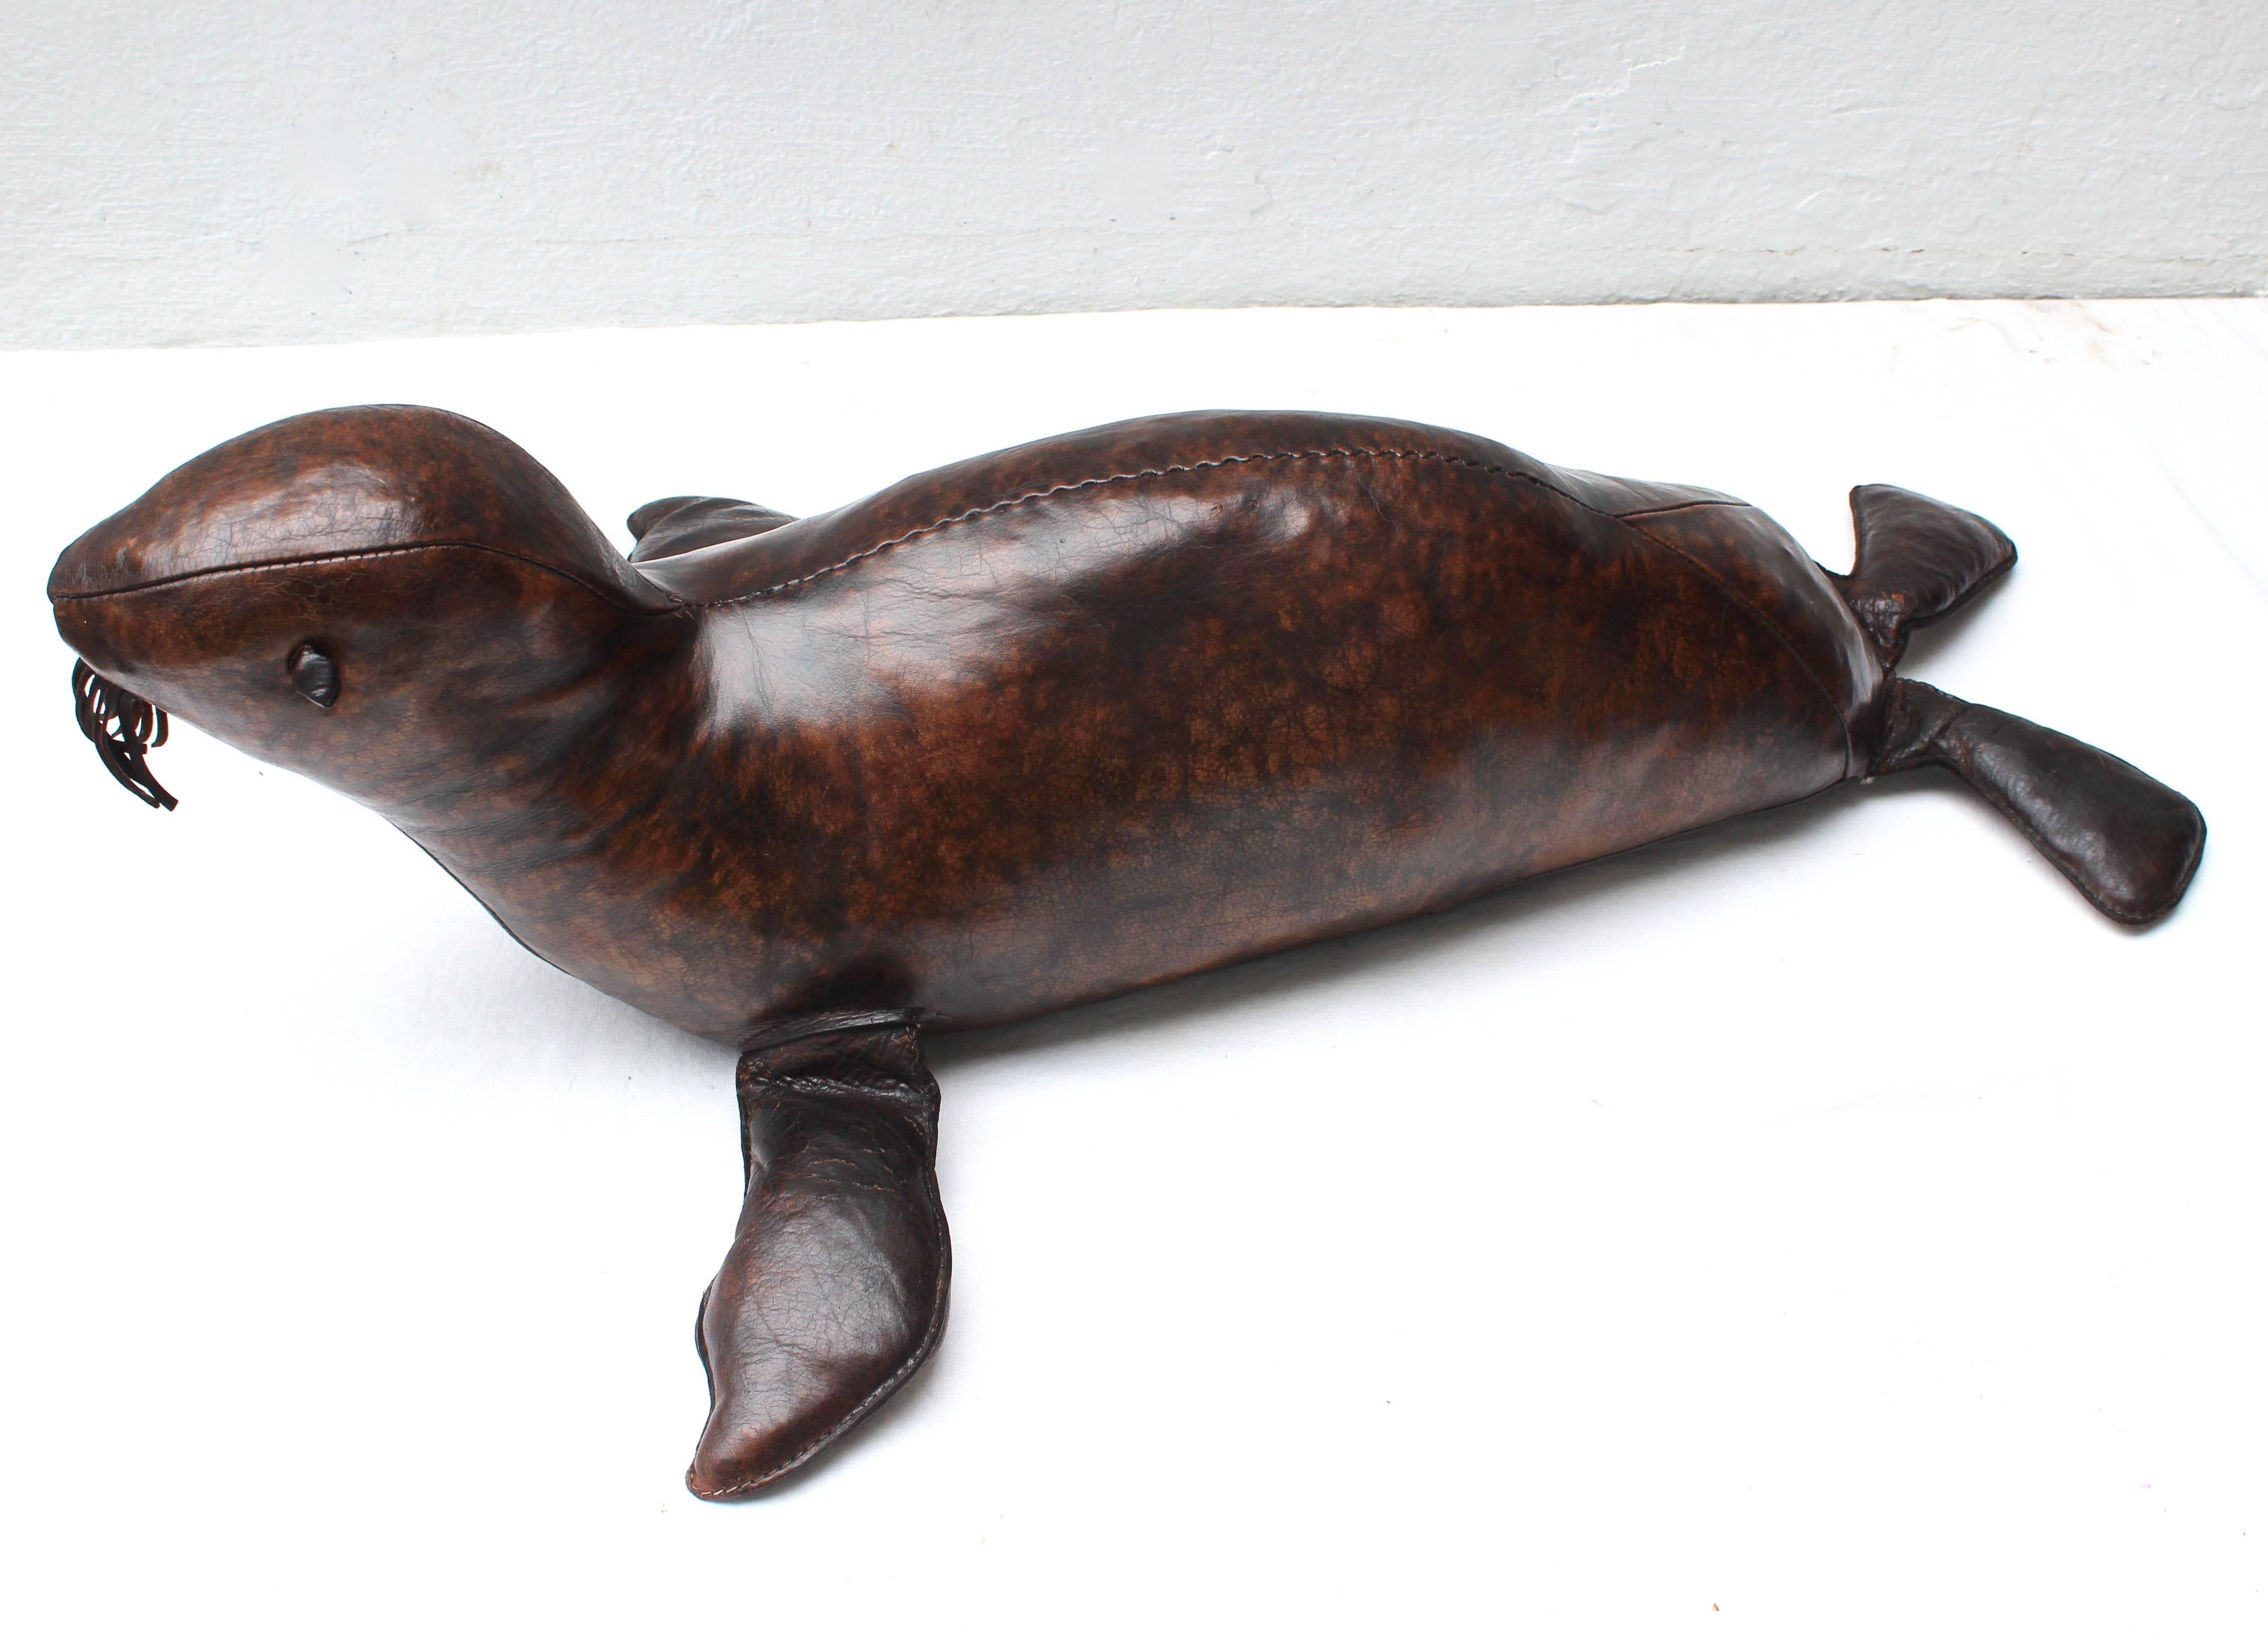 Rare find of an Abercrombie and Fitch leather seal sculpture.